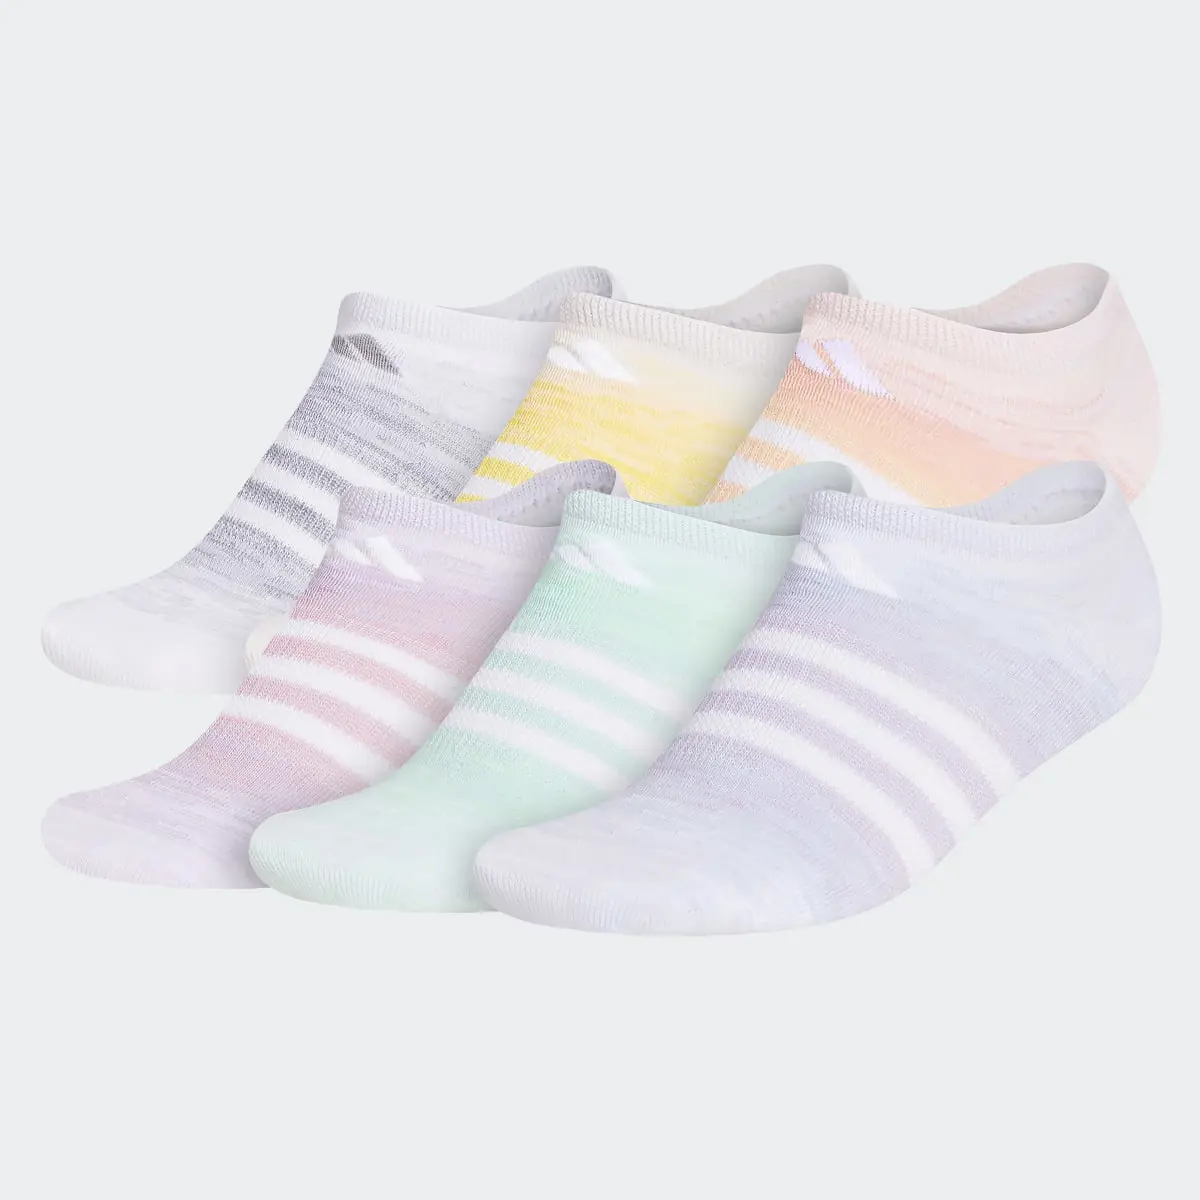 Adidas Ombre No-Show Socks 6 Pairs. 2